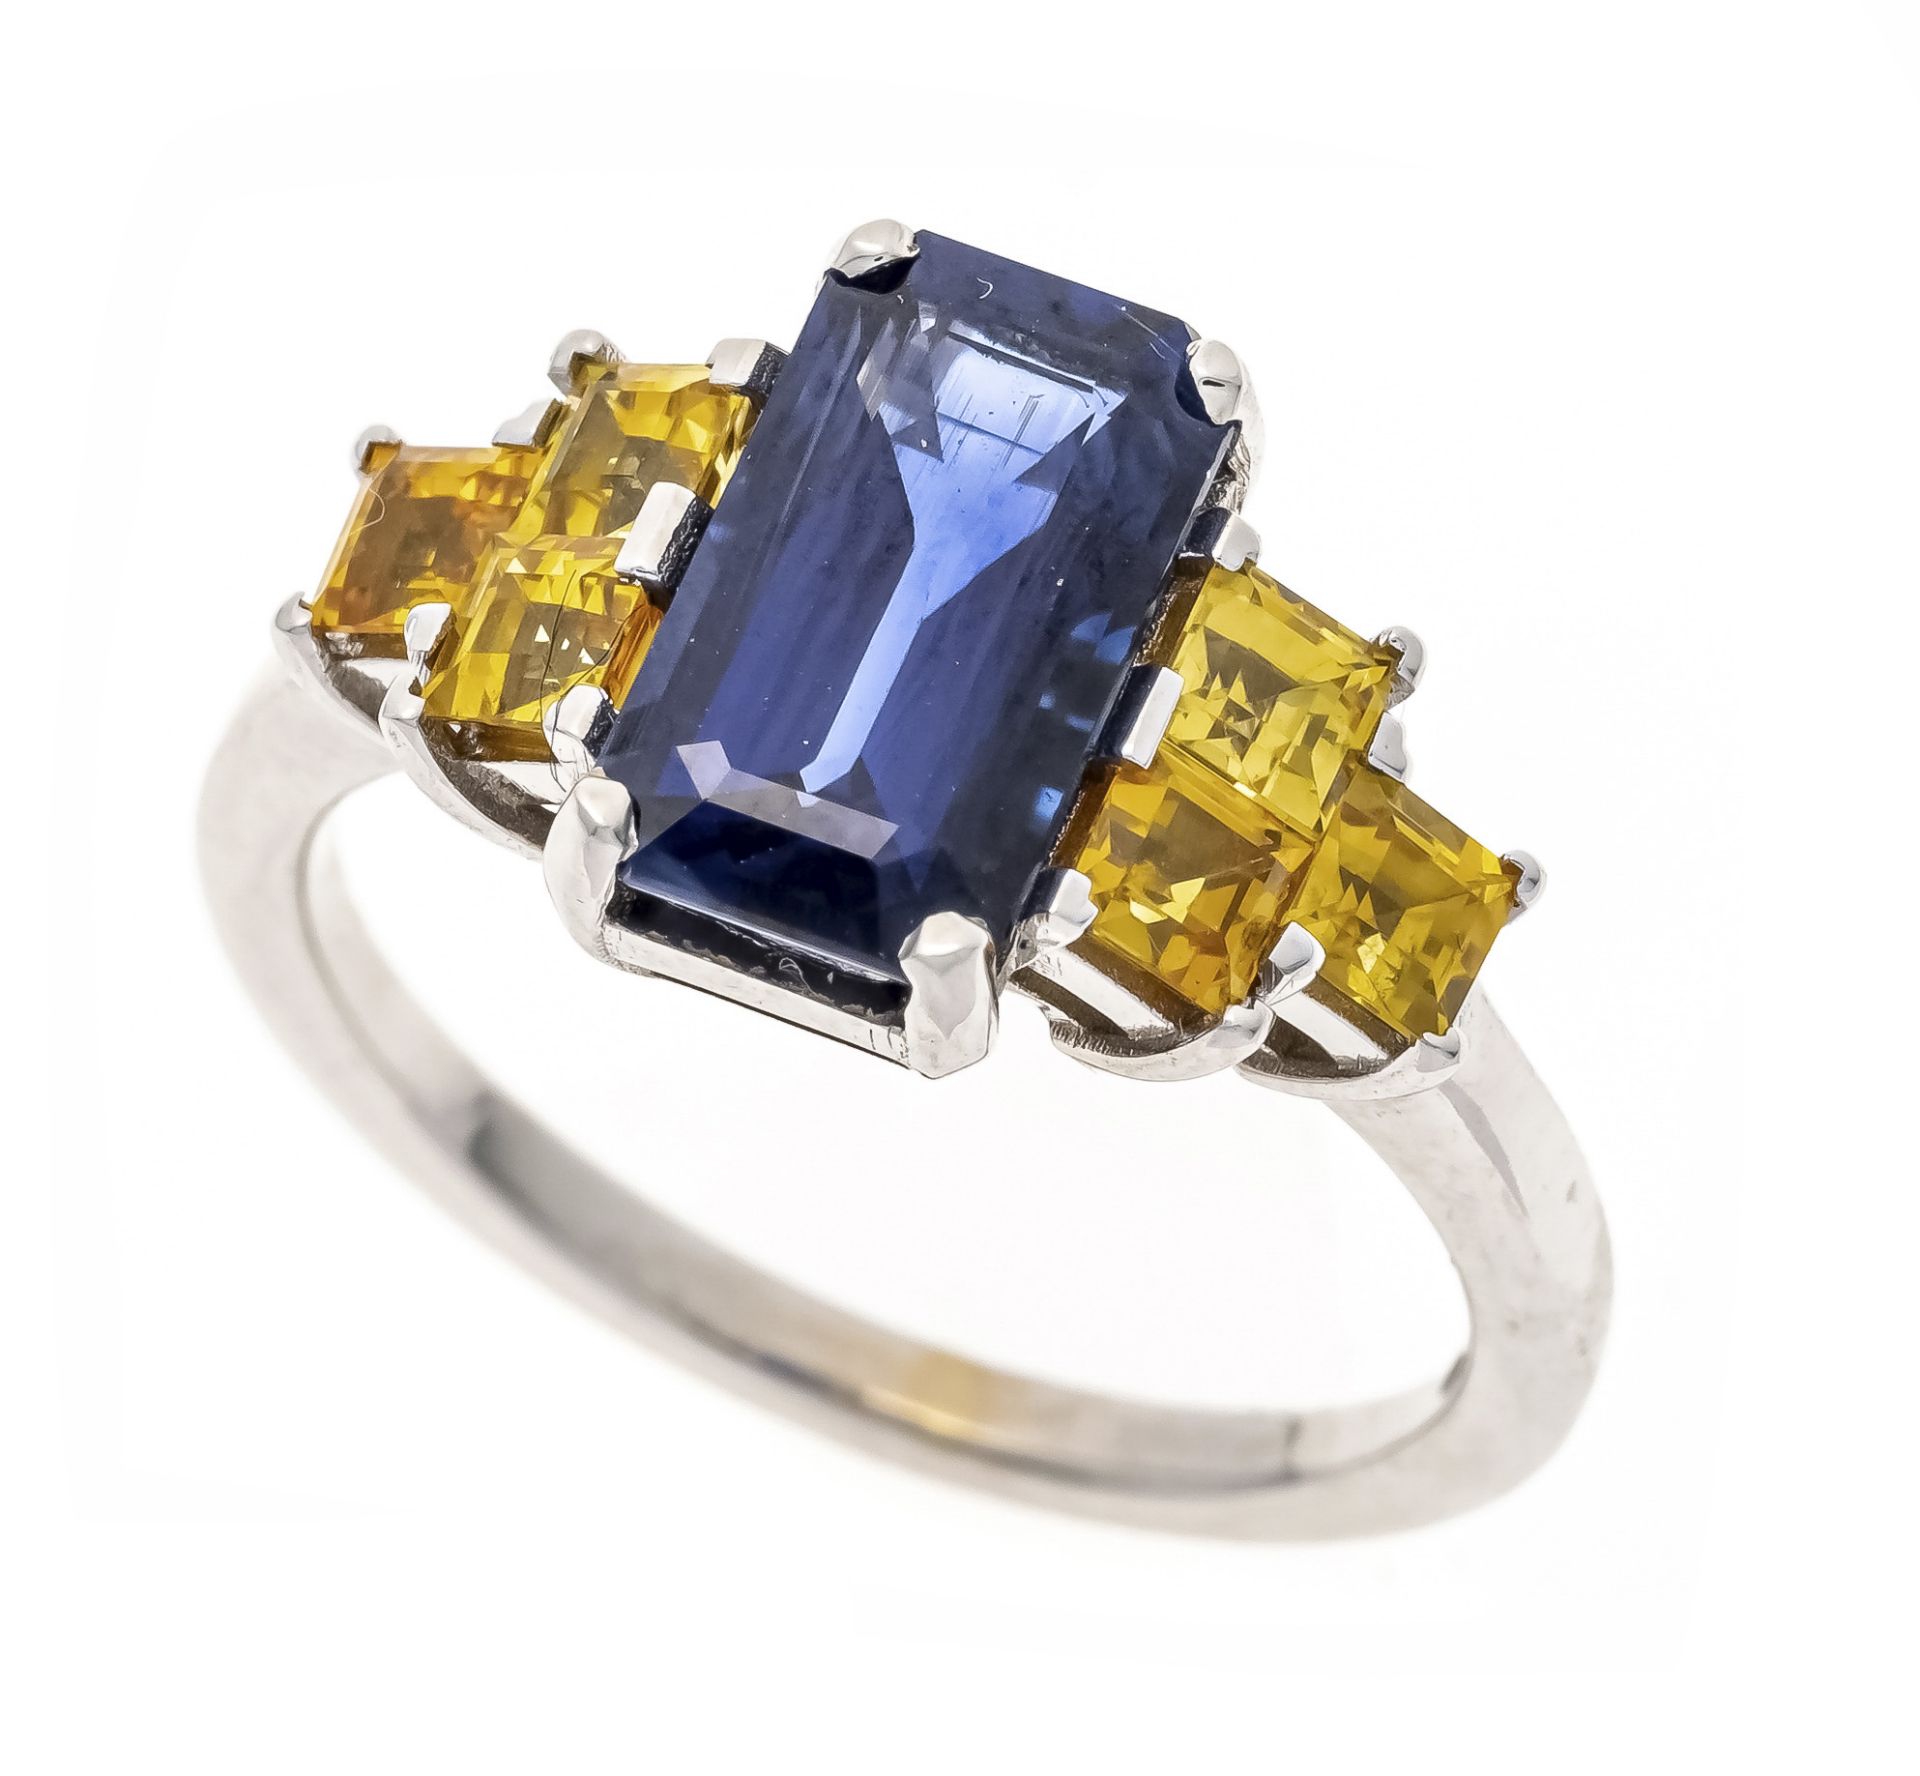 Sapphire ring WG 750/000 with one emerald-cut faceted sapphire 3.07 ct Darker blue, transparent with